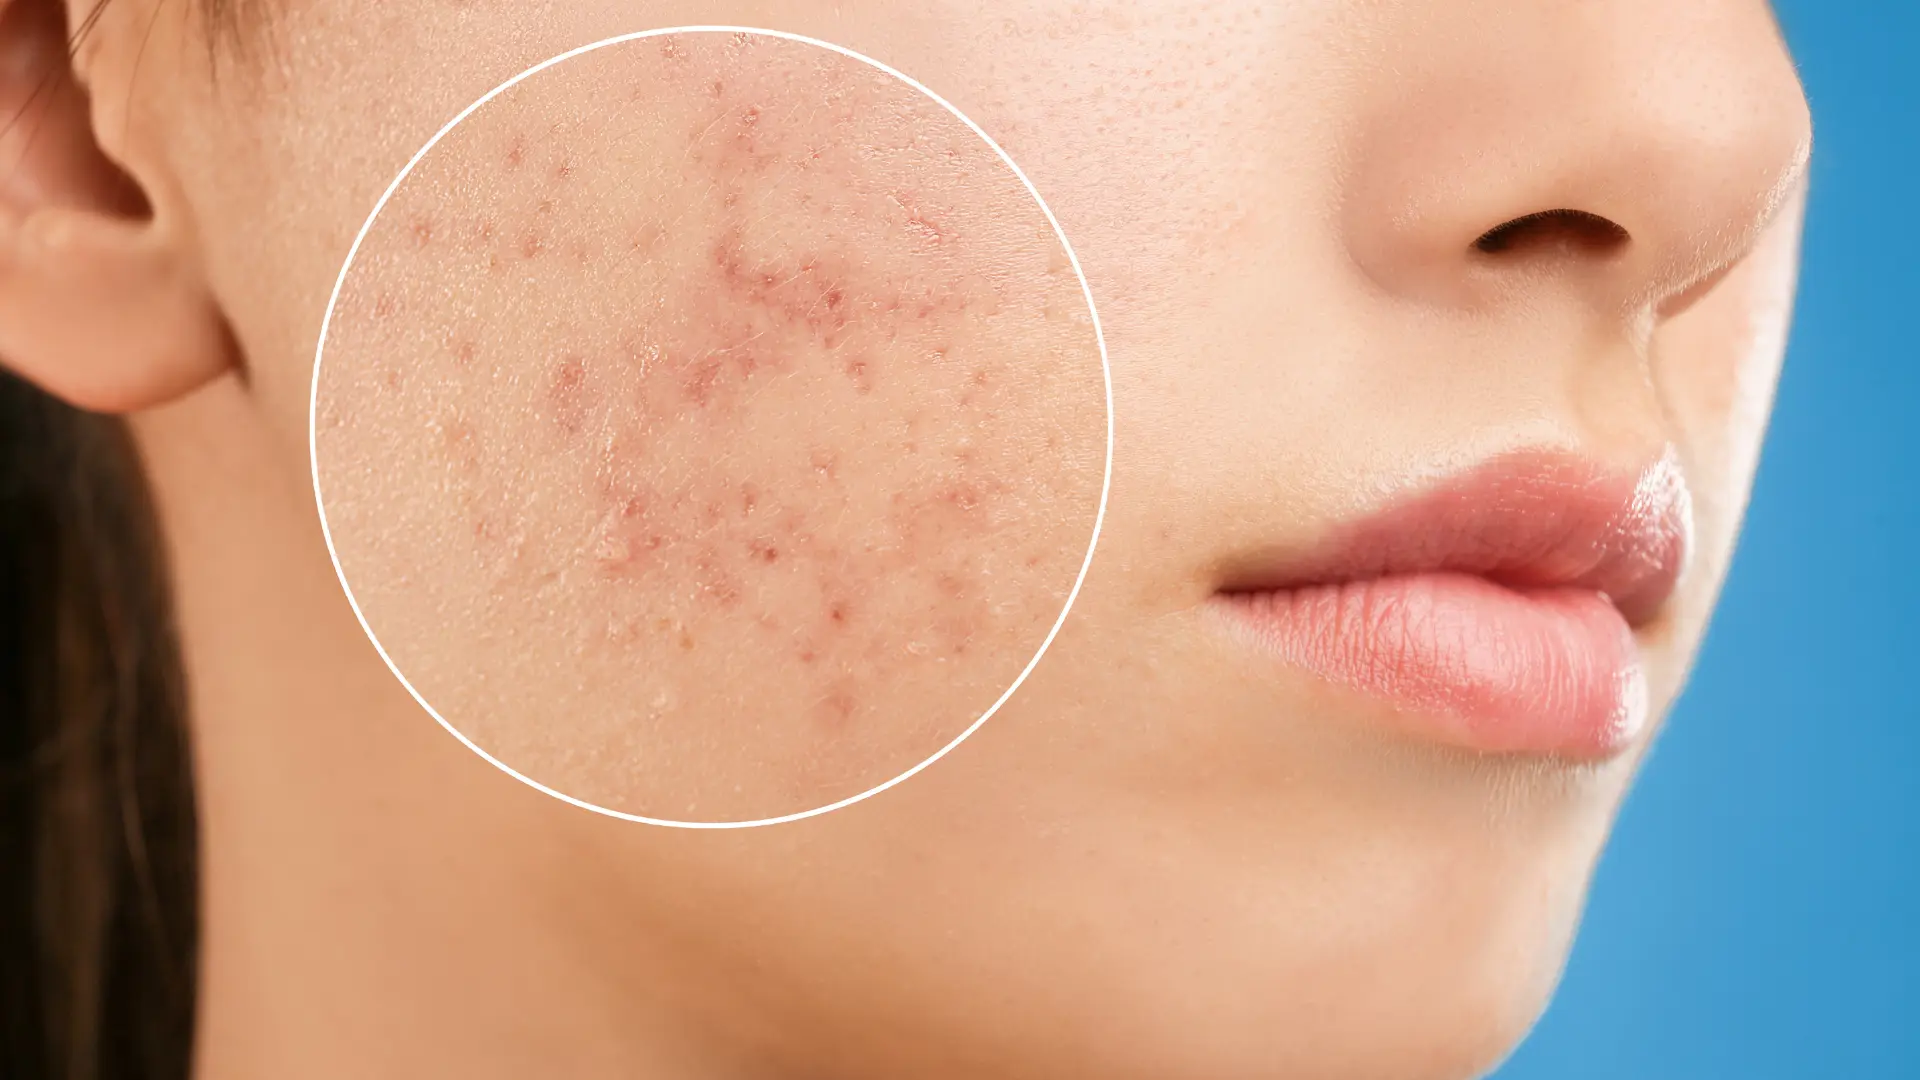 How To Treat Dry Acne-Prone Skin In The Winter?